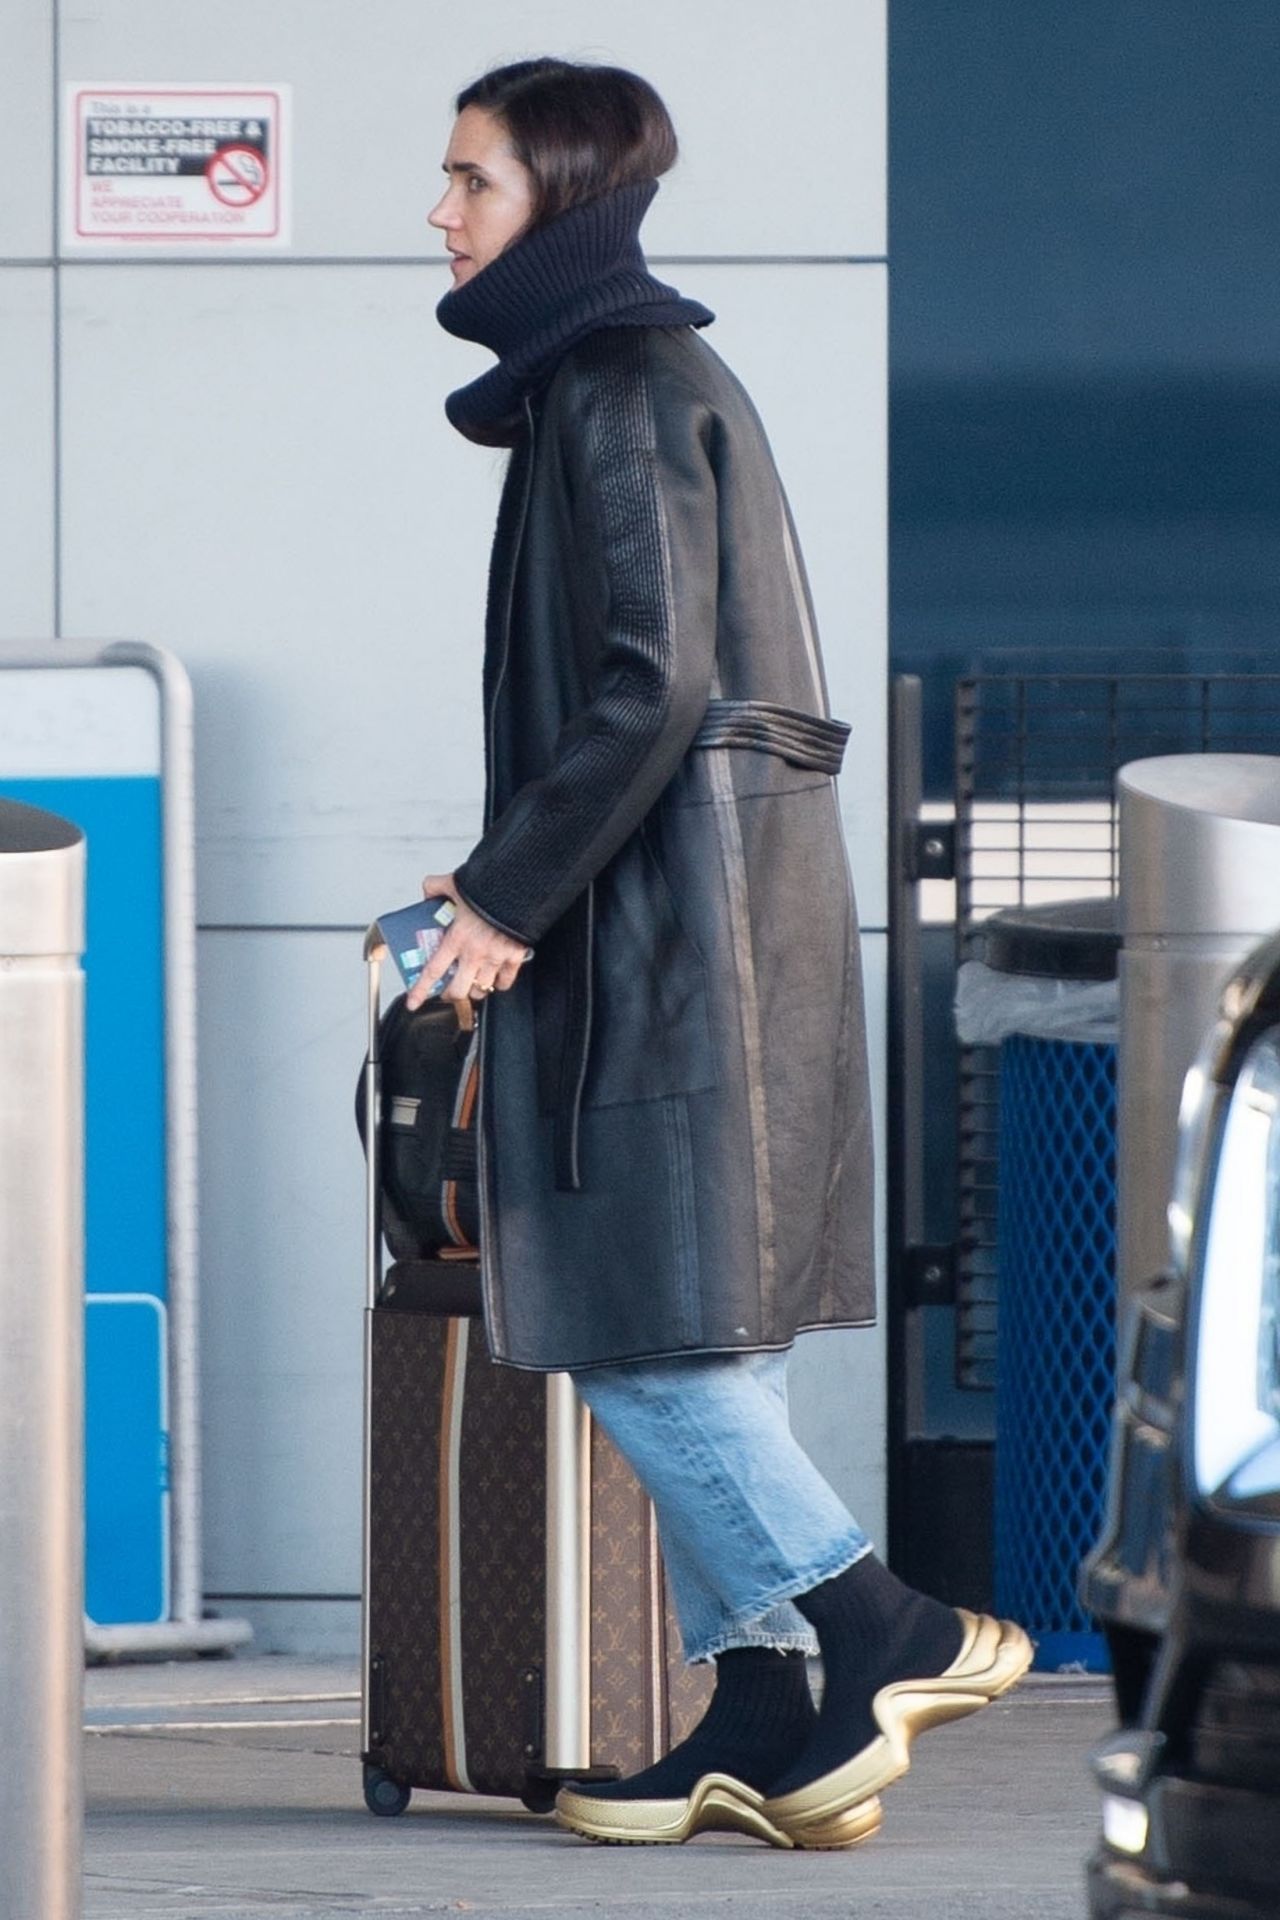 Jennifer Connelly arriving at JFK airport with her children New